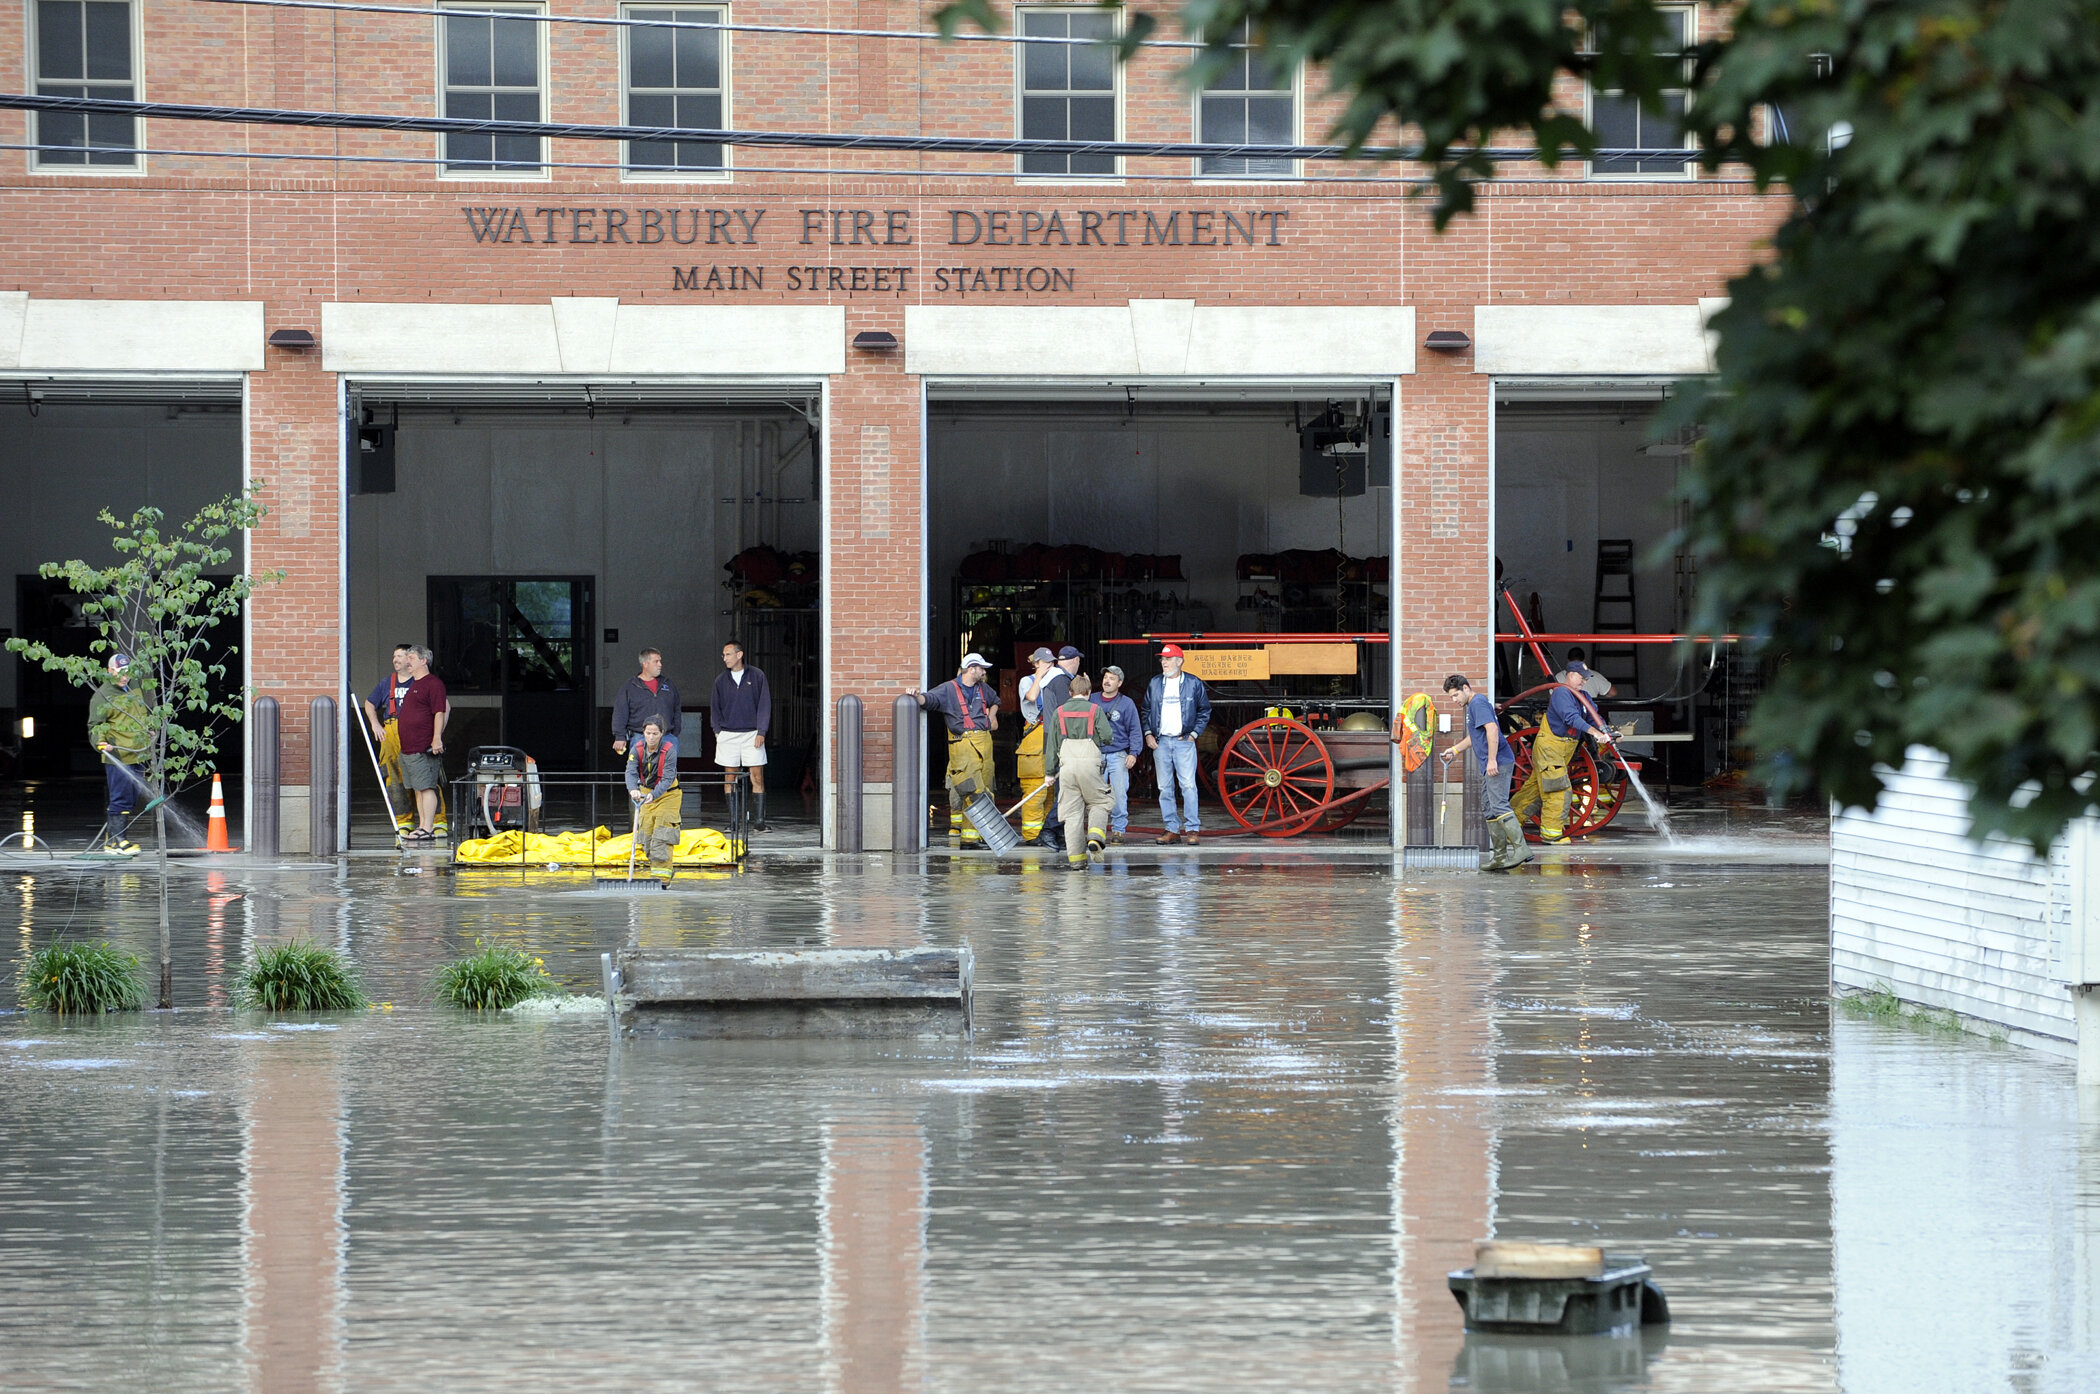  Waterbury’s fire station was open less than a month when Irene struck. It soon became the headquarters for Federal Emergency Management Administration personnel and in November 2011, municipal staff moved into the upstairs offices for what would be 